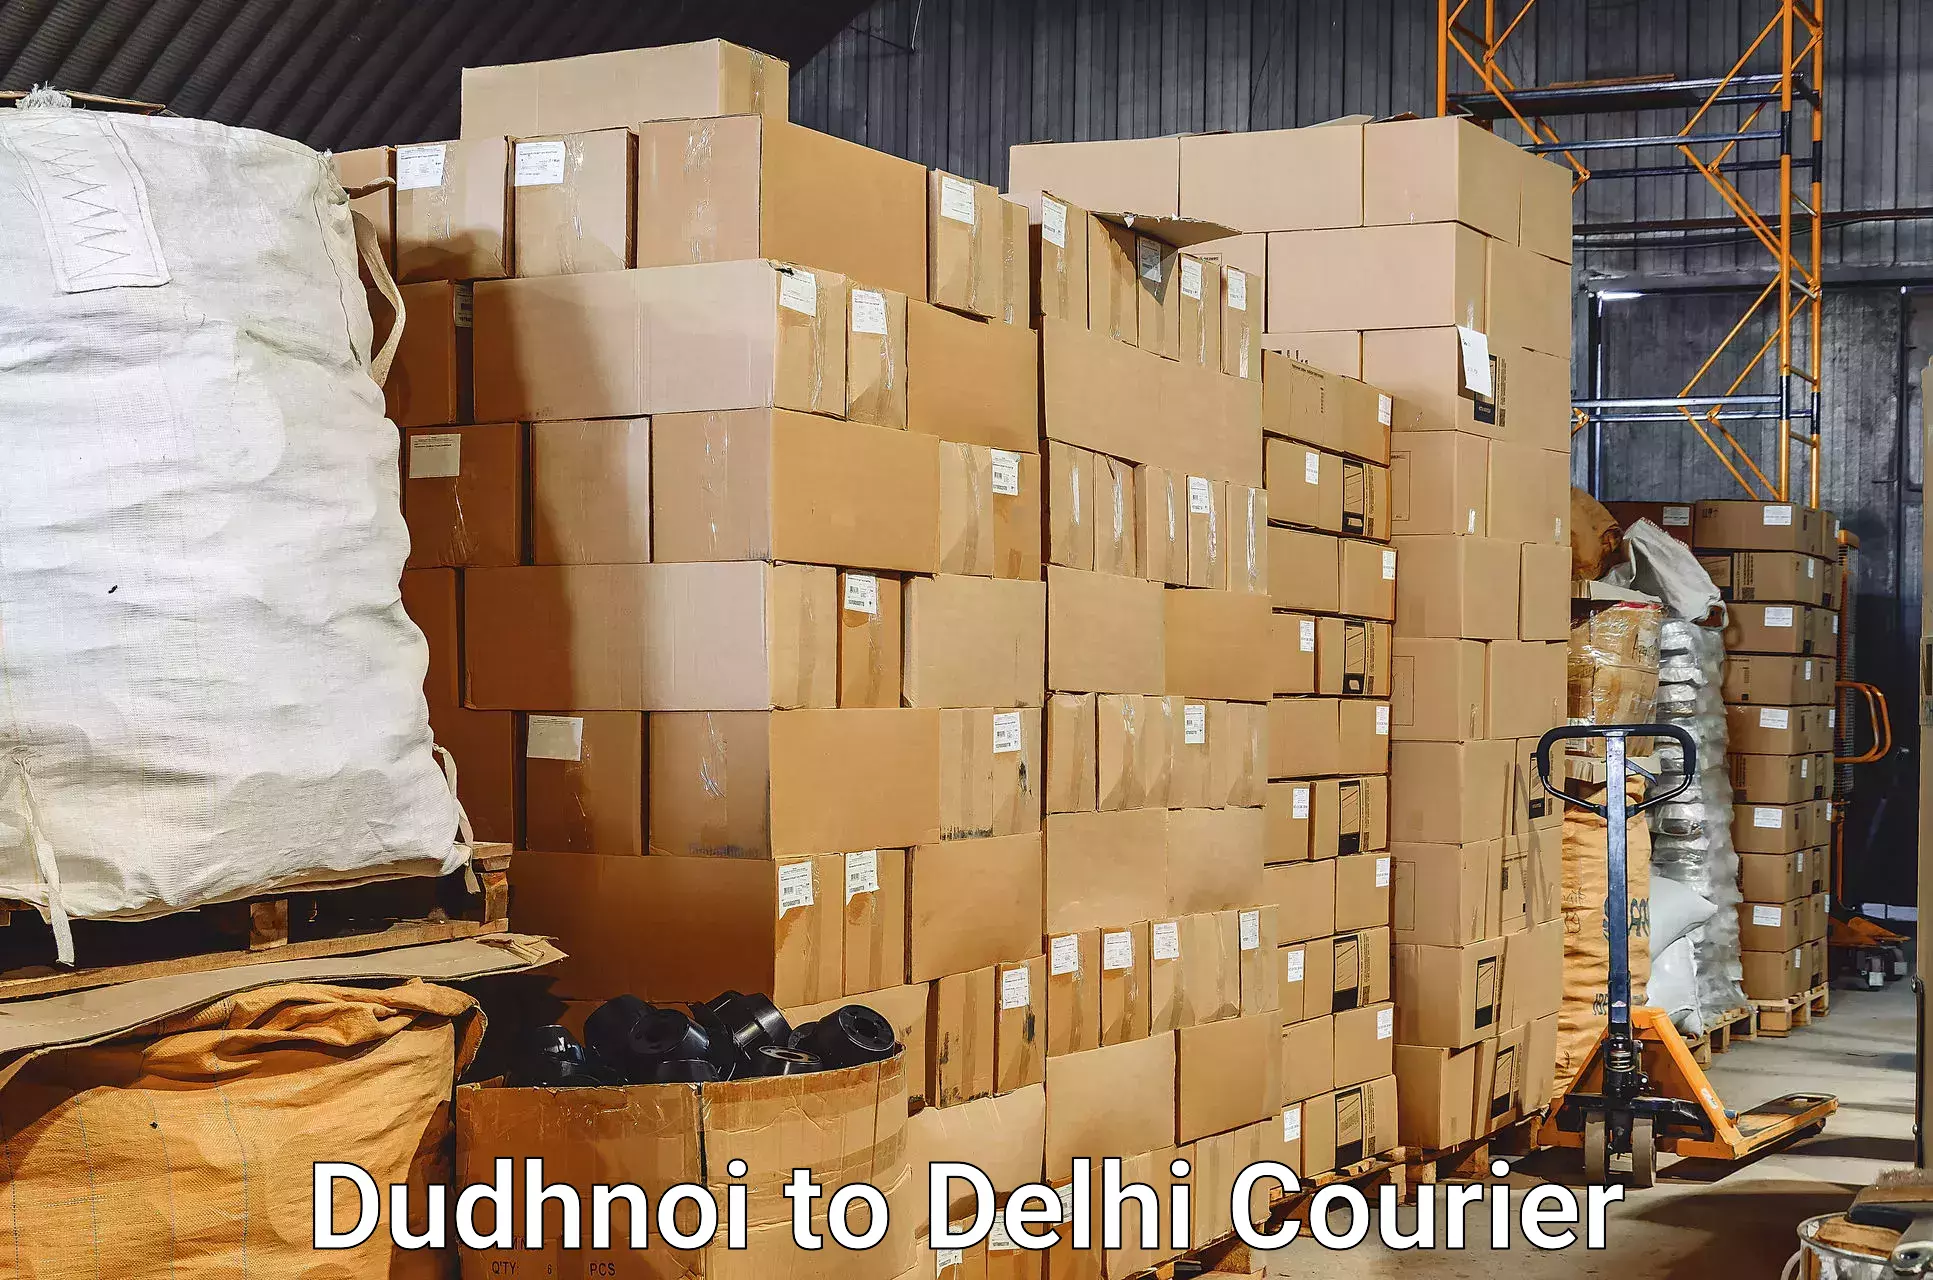 Luggage dispatch service Dudhnoi to East Delhi